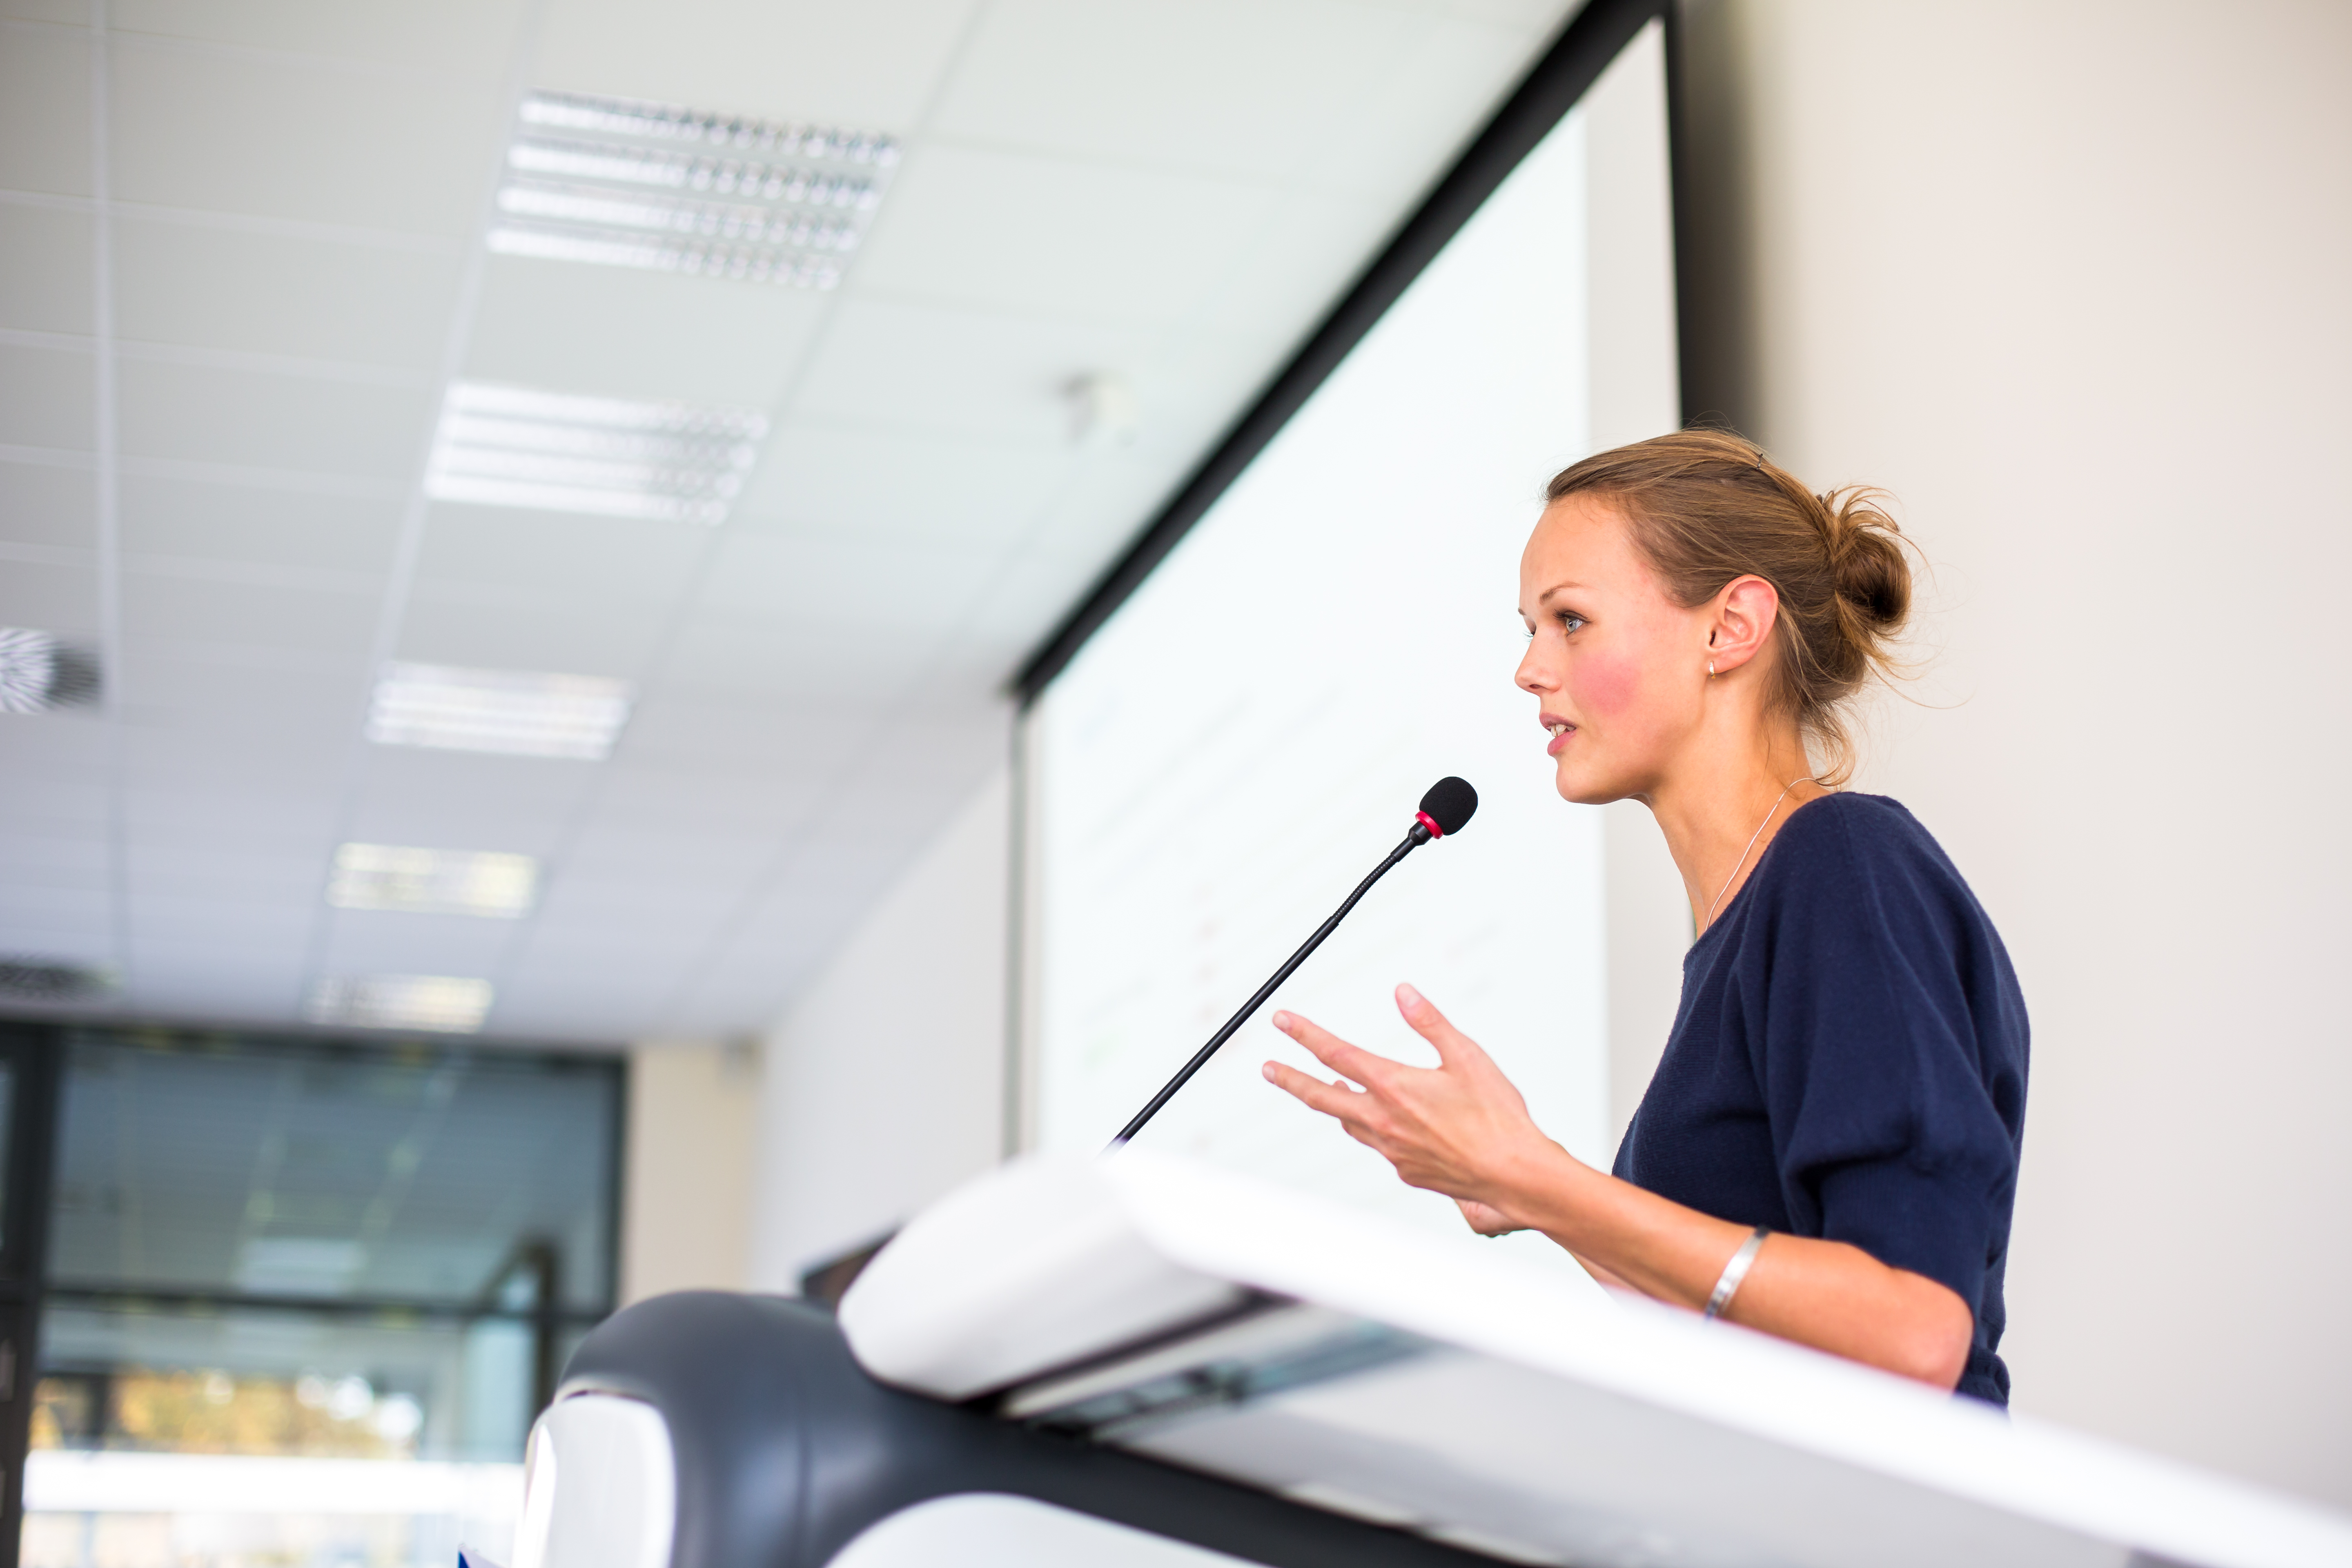 The 6 mistakes you're making with your PowerPoint slides